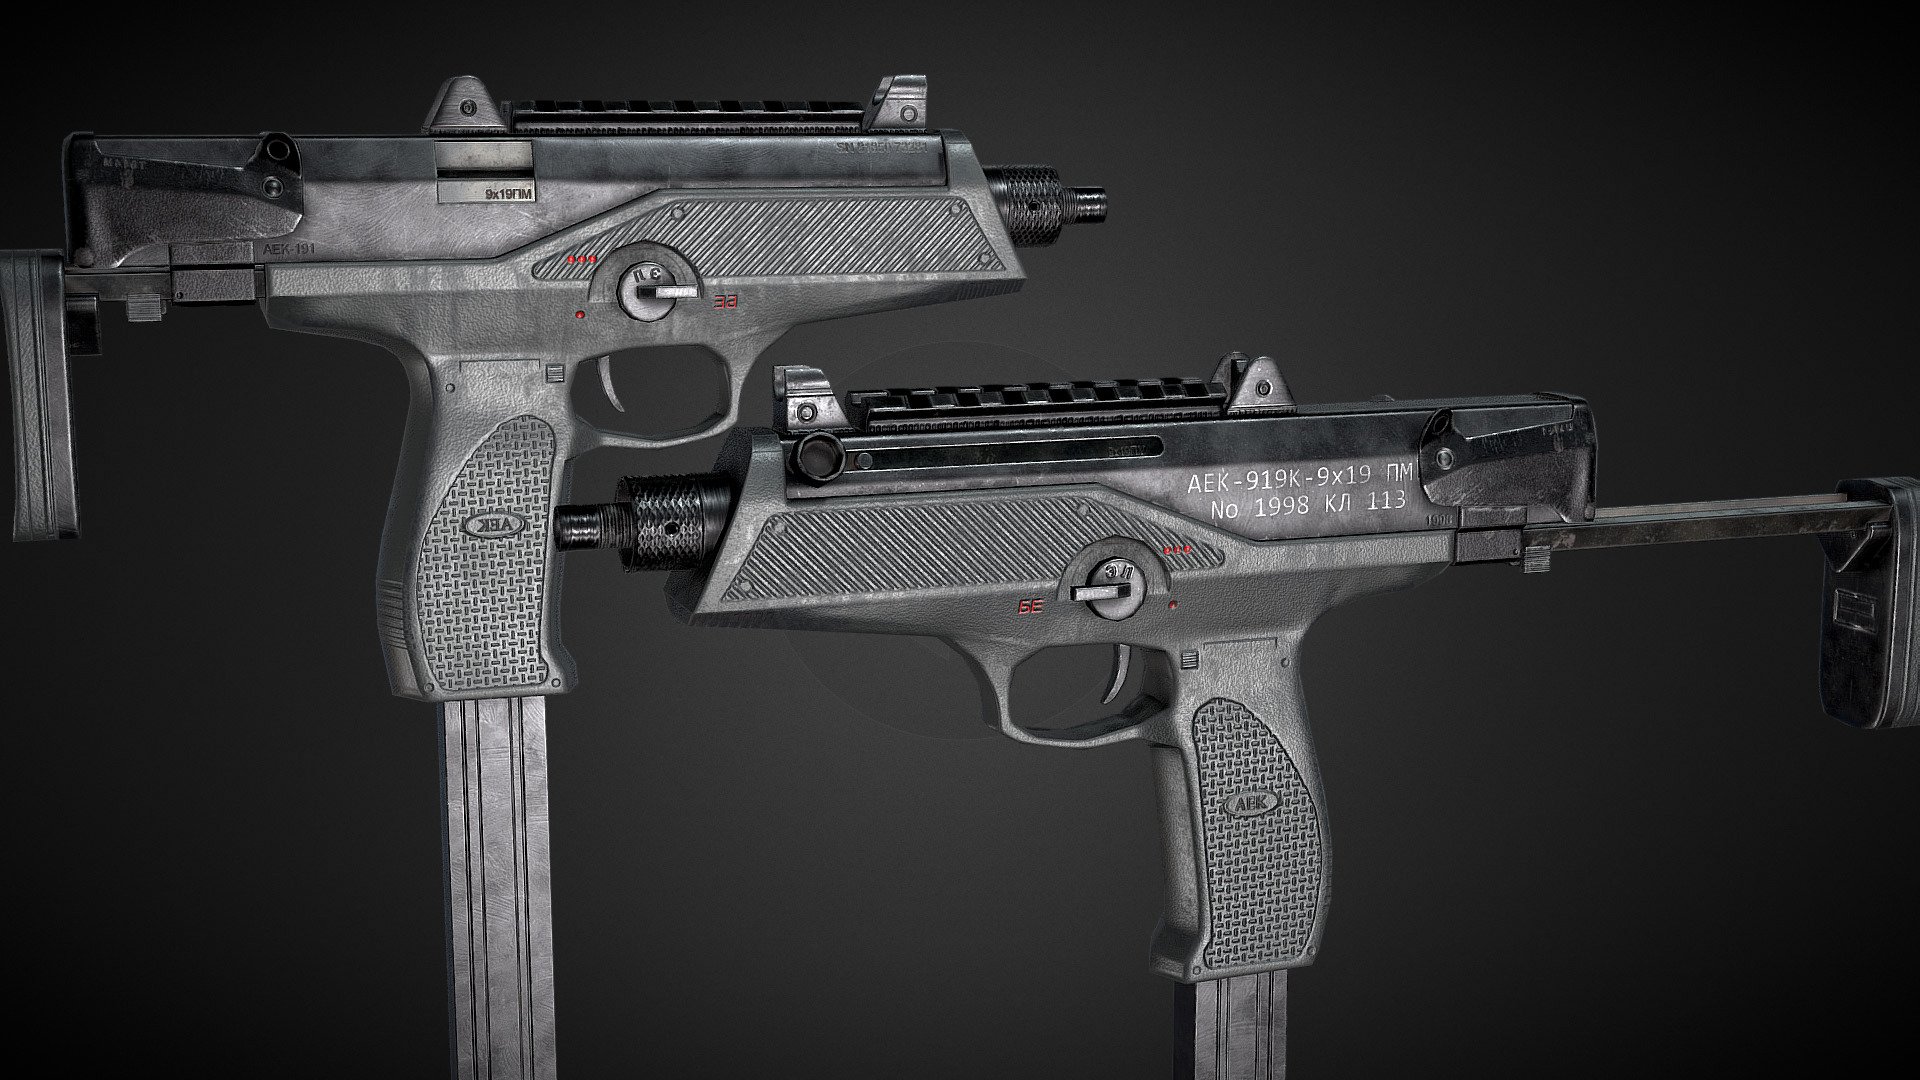 The AEK-919 SMG Optimized for mobile/Standalone VR applications with a polycount of 1882Tris

The version to the right has a single 1024x1024 texture while the Left is the 4096x4096 Version. The 1024x1024 version suffers a little bit due to sketchfab texture compression but should look cleaner in your target engine if compression quality is set to high or none.

For correct rotations in Unity engine you might need to tick the “Bake axis conversion” import option when importing the FBX.

An additional 128x128 texture set is used for the 9x19mm Bullets inside the weapon on the right version while the left one uses a 1024x1024 texture for the bullet 3d model